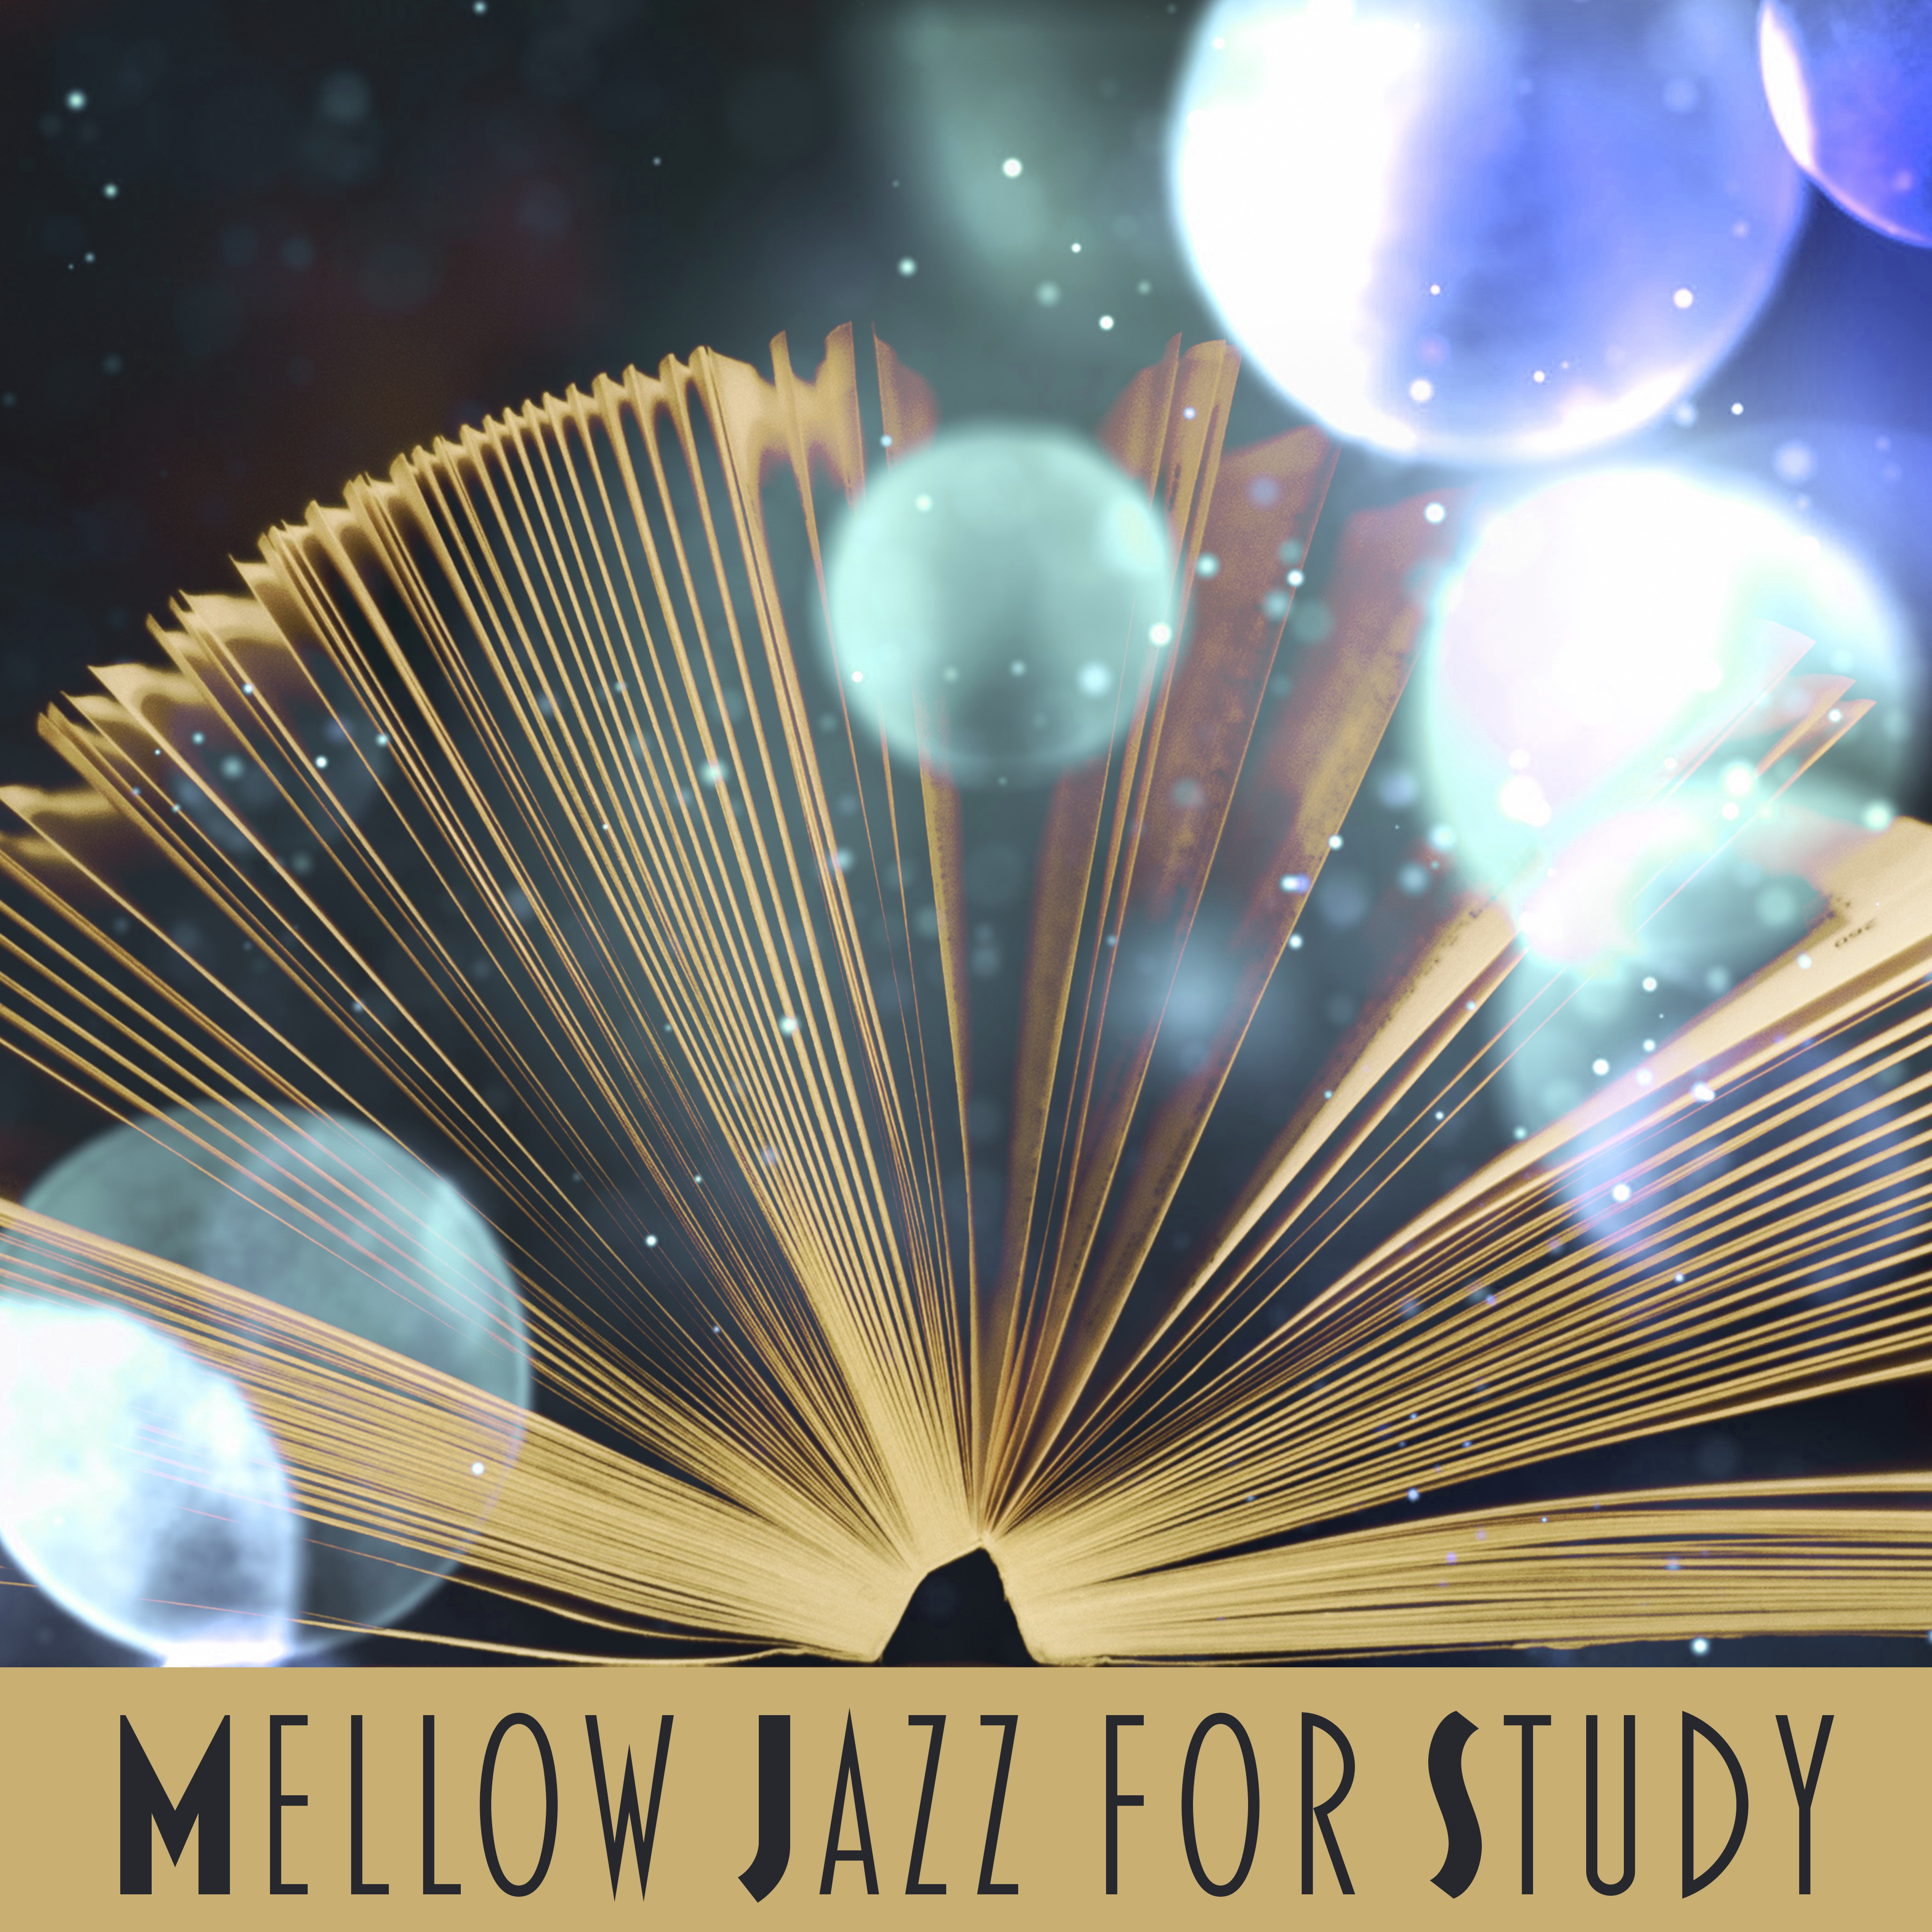 Mellow Jazz for Study  Smooth Jazz for Learning, Better Concentration, Brain Power, Piano Music, Deep Focus